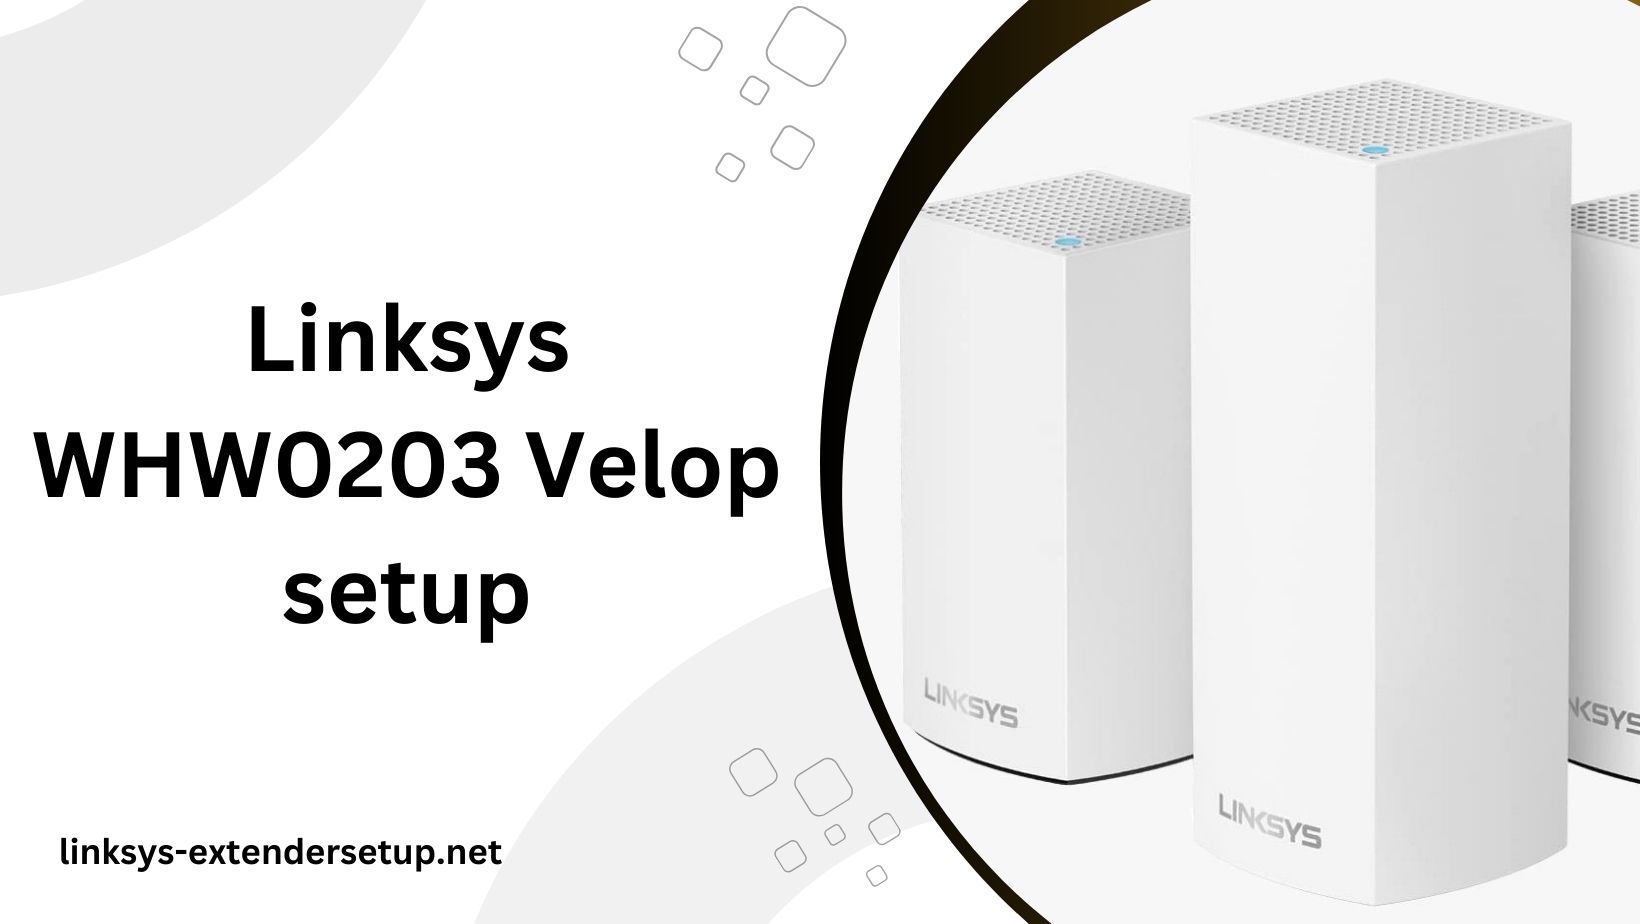 You are currently viewing An Introduction to Linksys WHW0203 Velop Setup